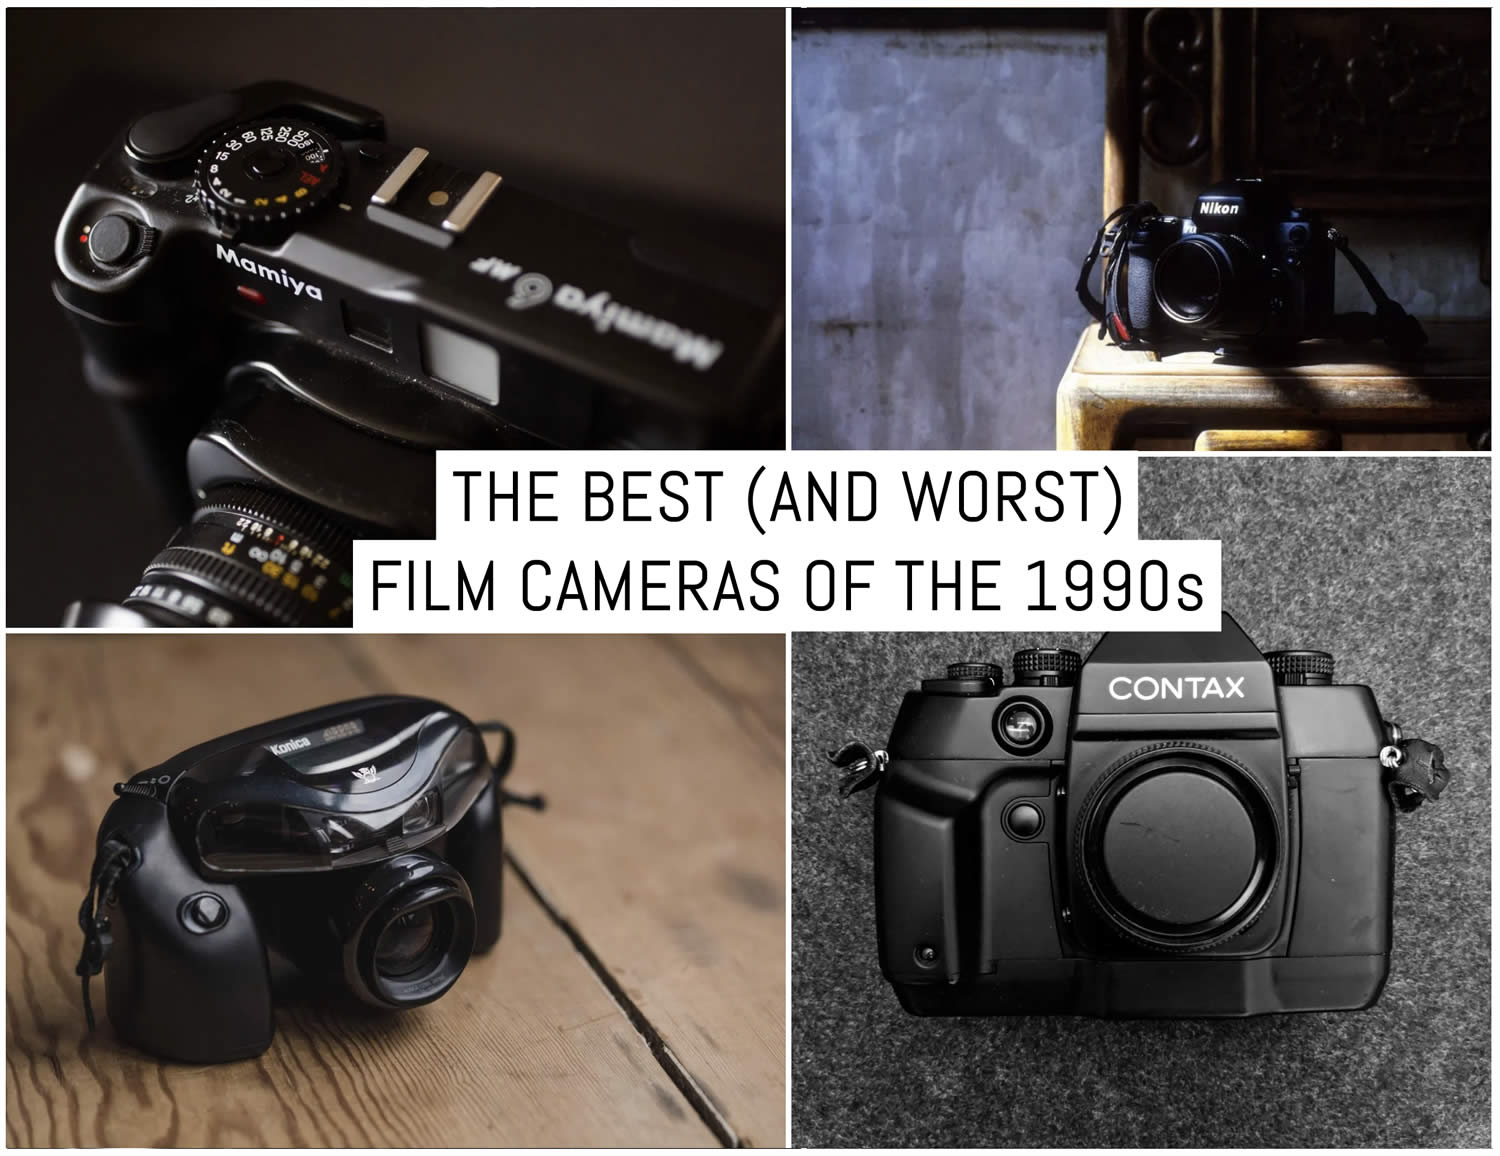 The best (and worst) film cameras of the 1990s - EMULSIVE